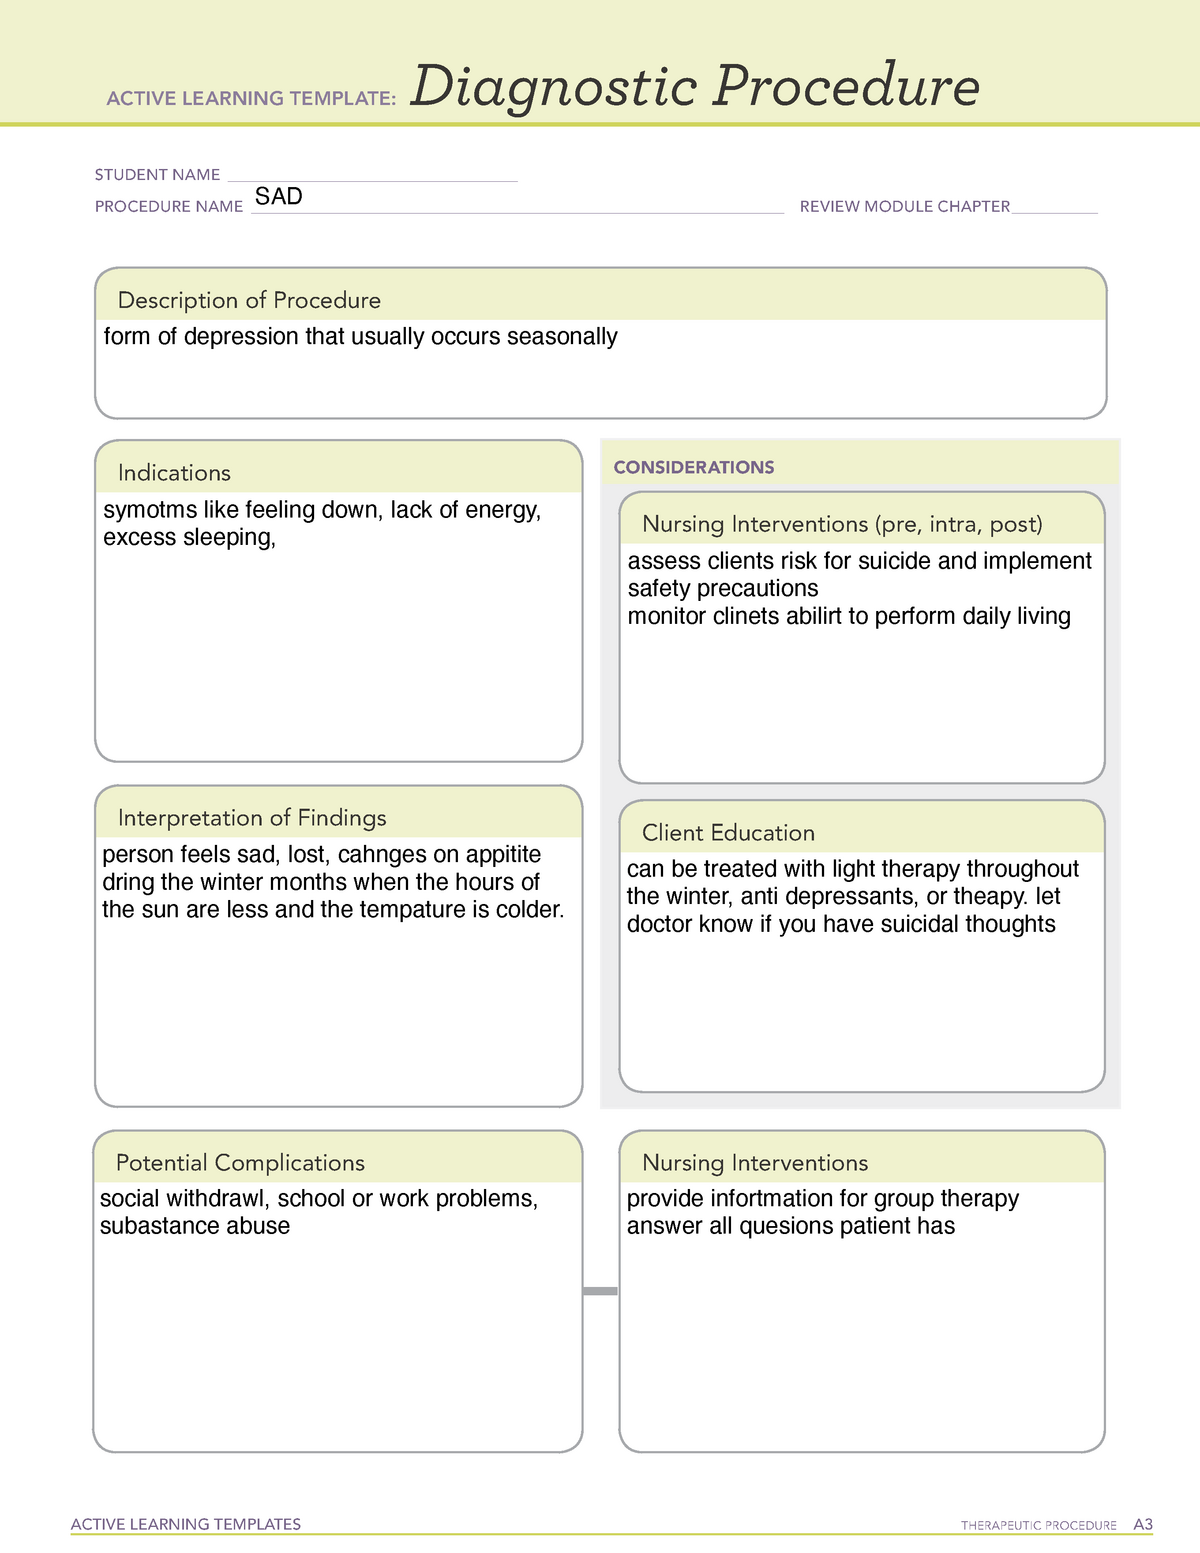 active-learning-template-diagnostic-procedure-form-active-learning